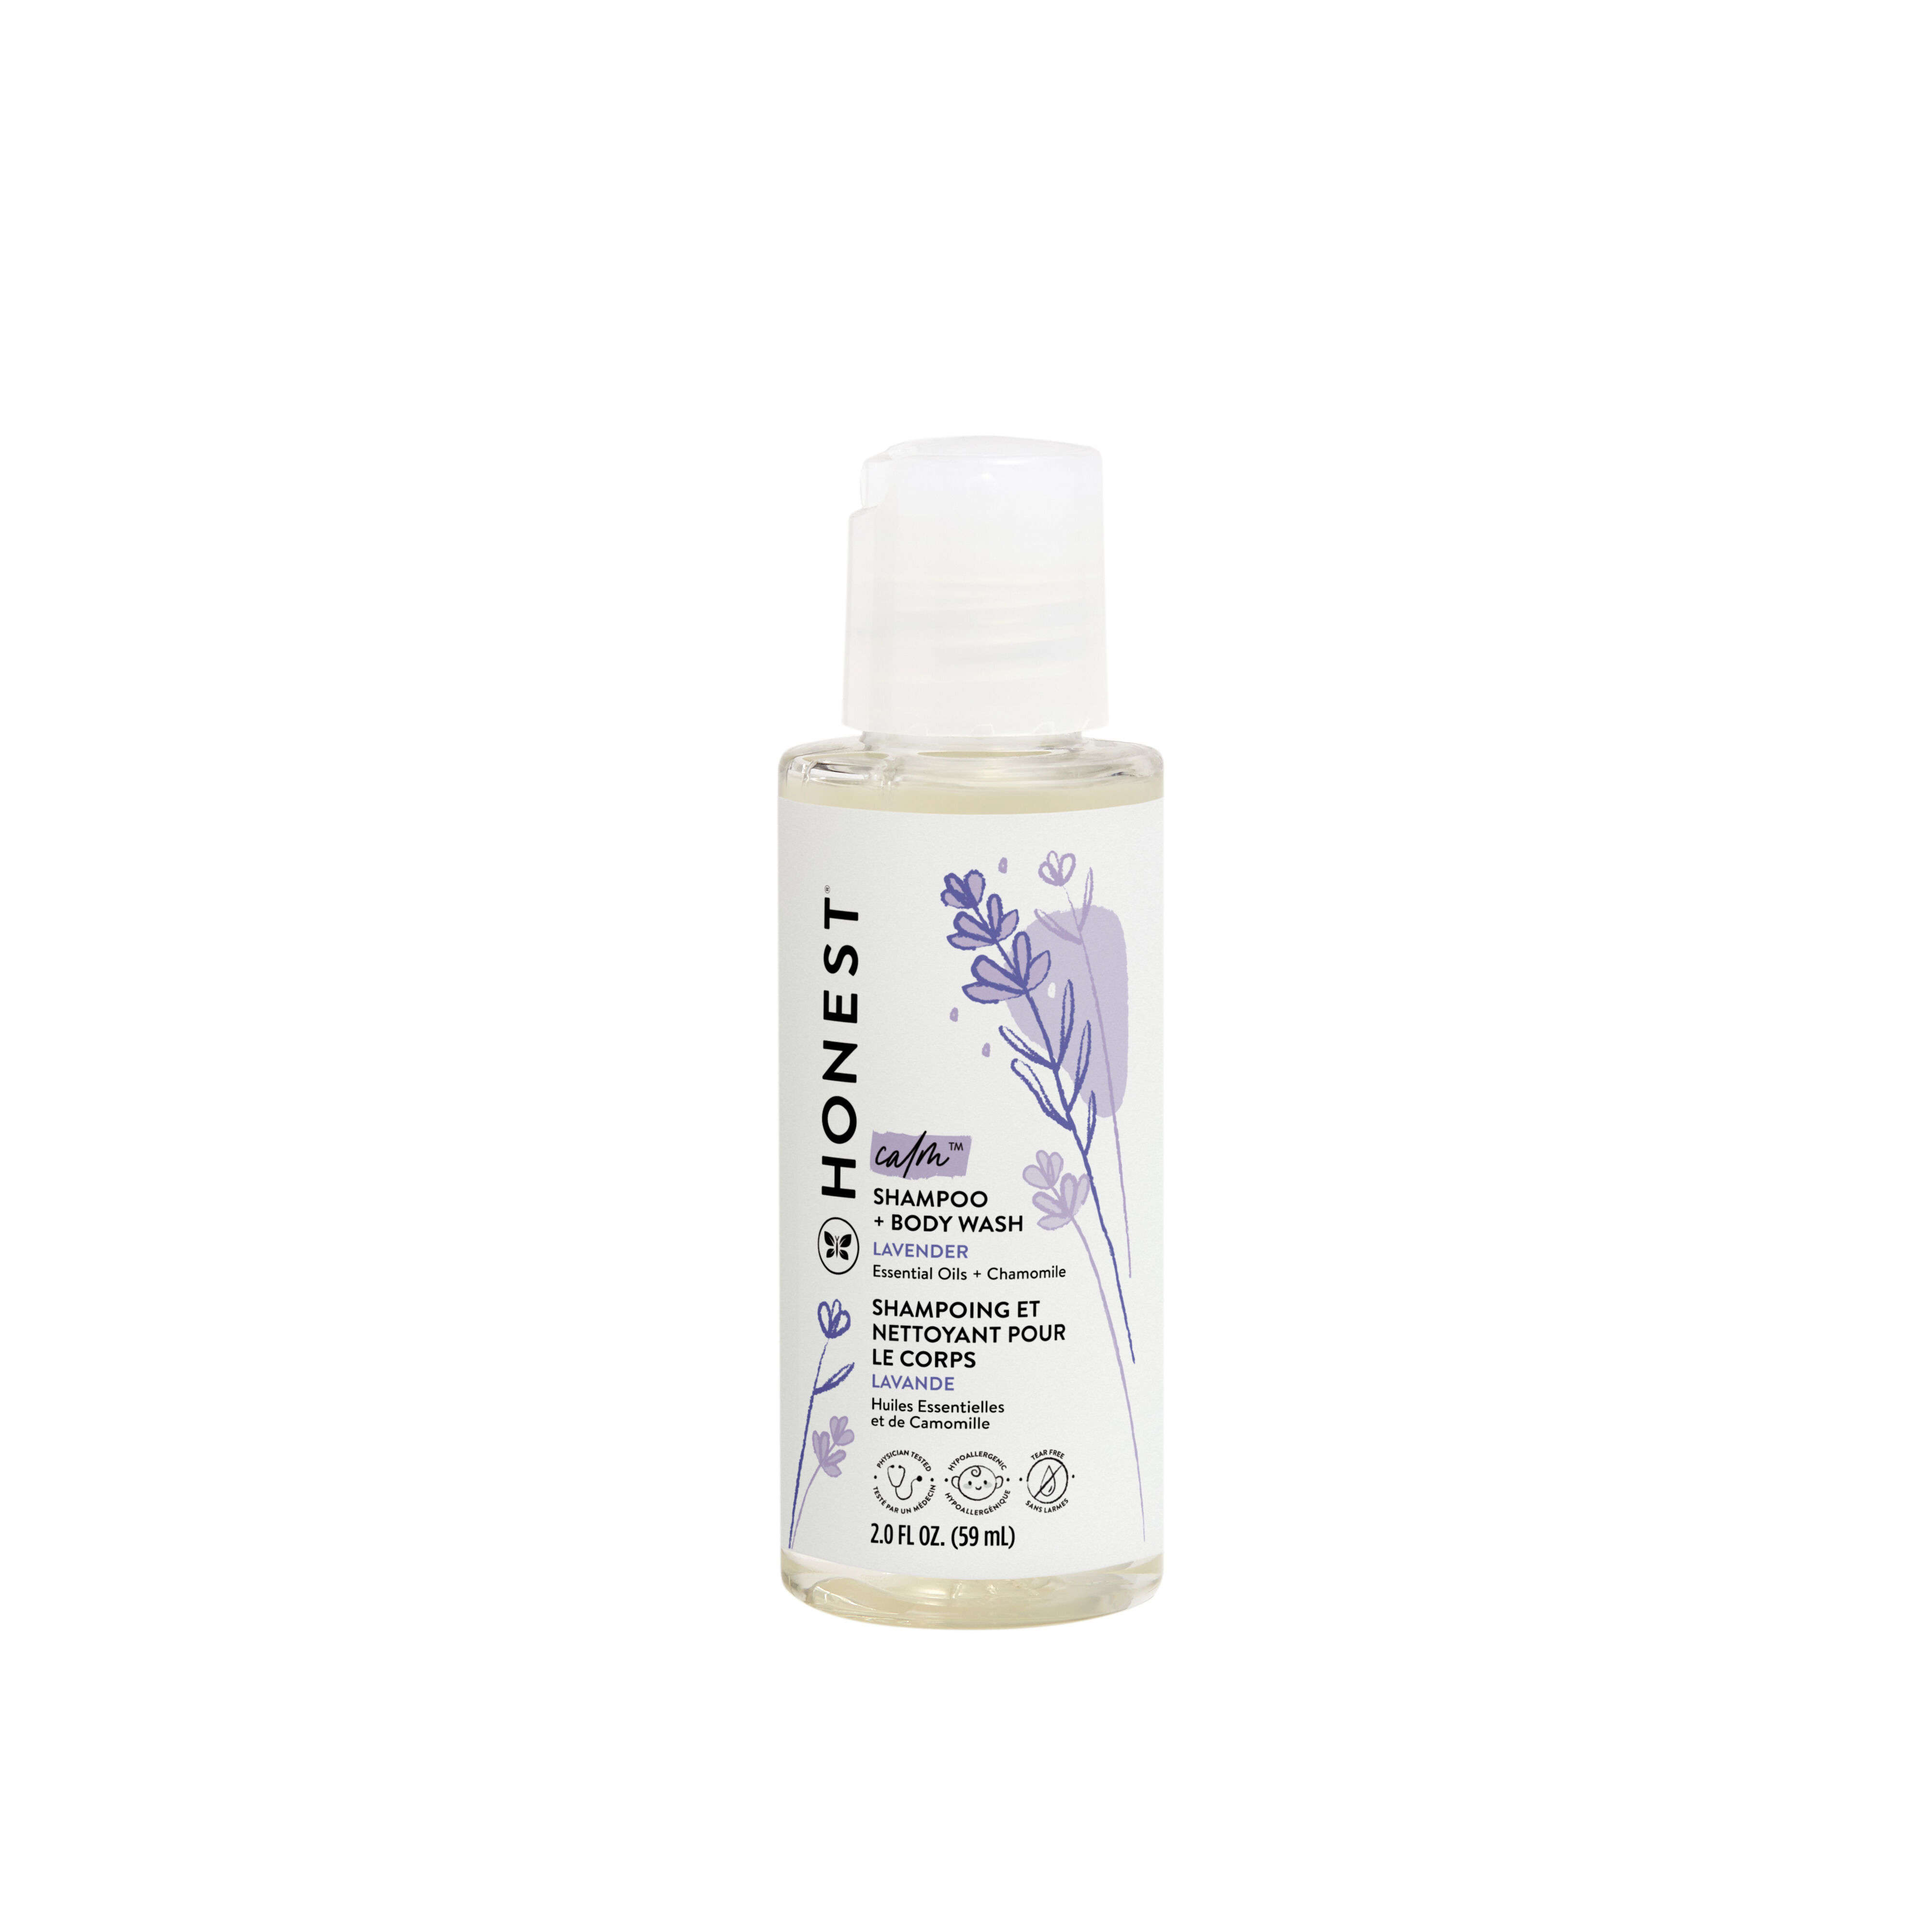 3-in-1 Shampoo with 100% Natural Lavender